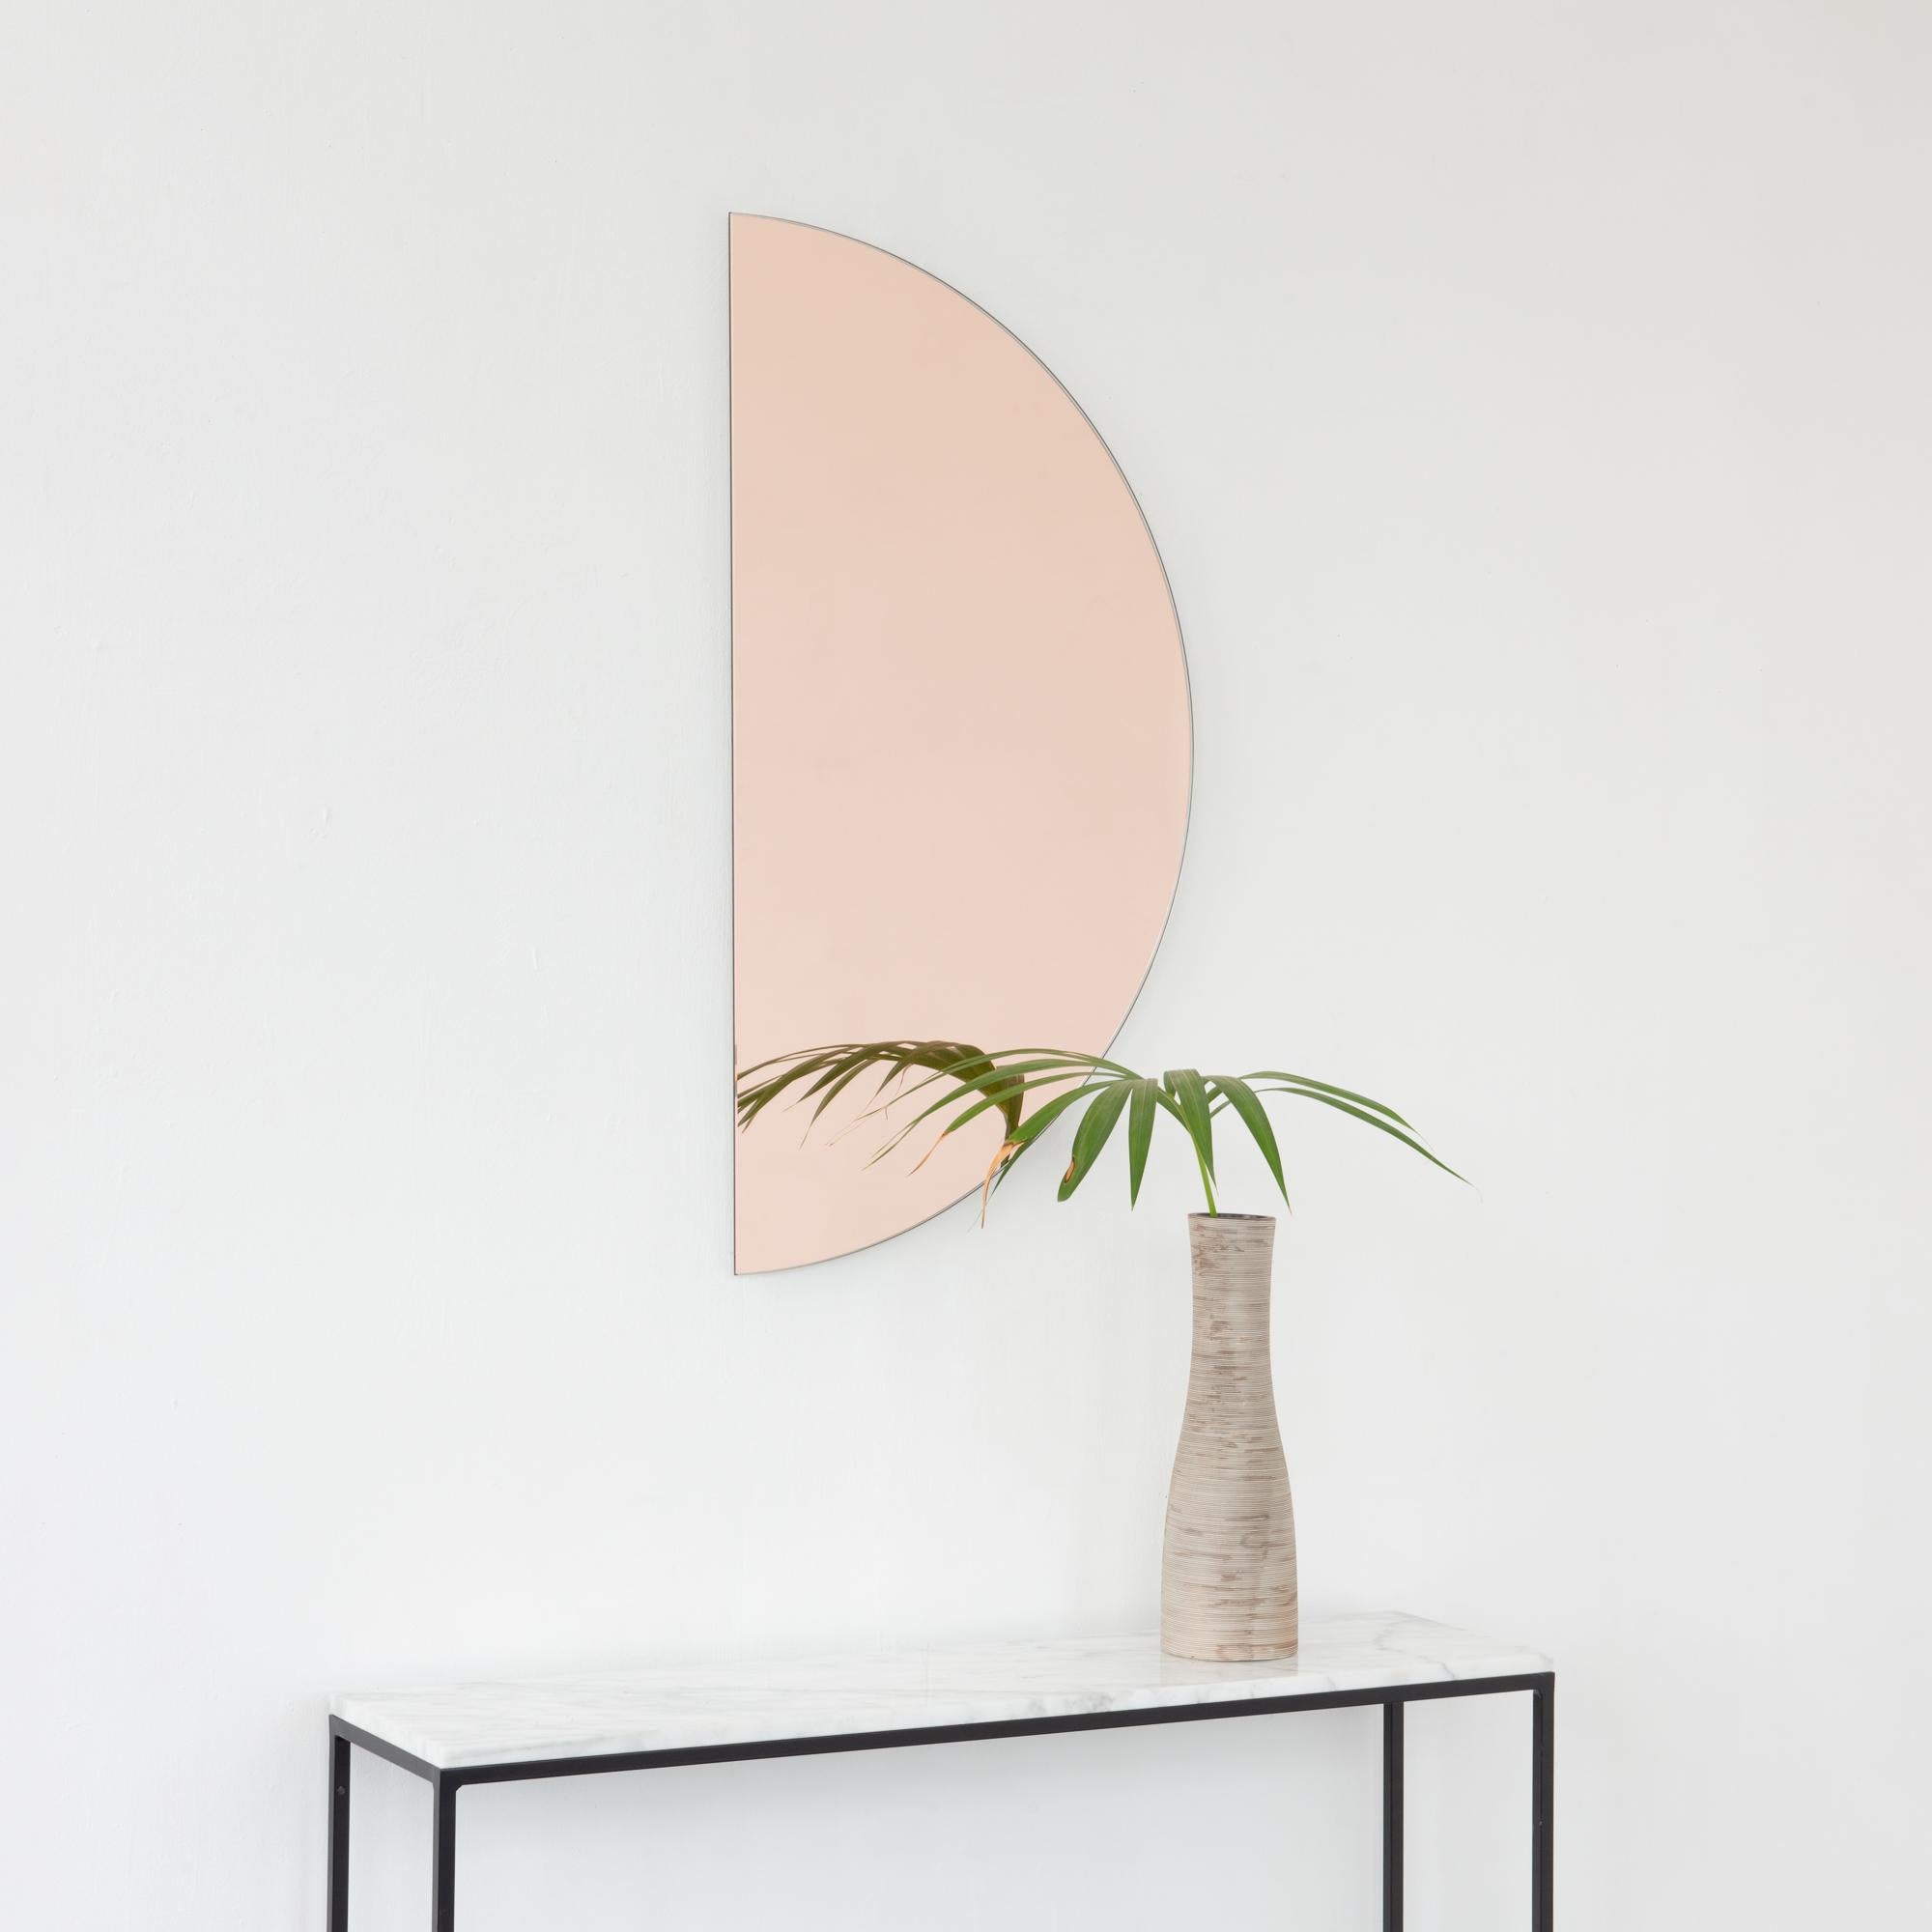 Minimalist half-moon rose gold (peach) tinted frameless mirror with a floating effect. Fitted with a quality and ingenious hanging system for a flexible installation in 4 different directions. Designed and made in London, UK. 

The backing has a